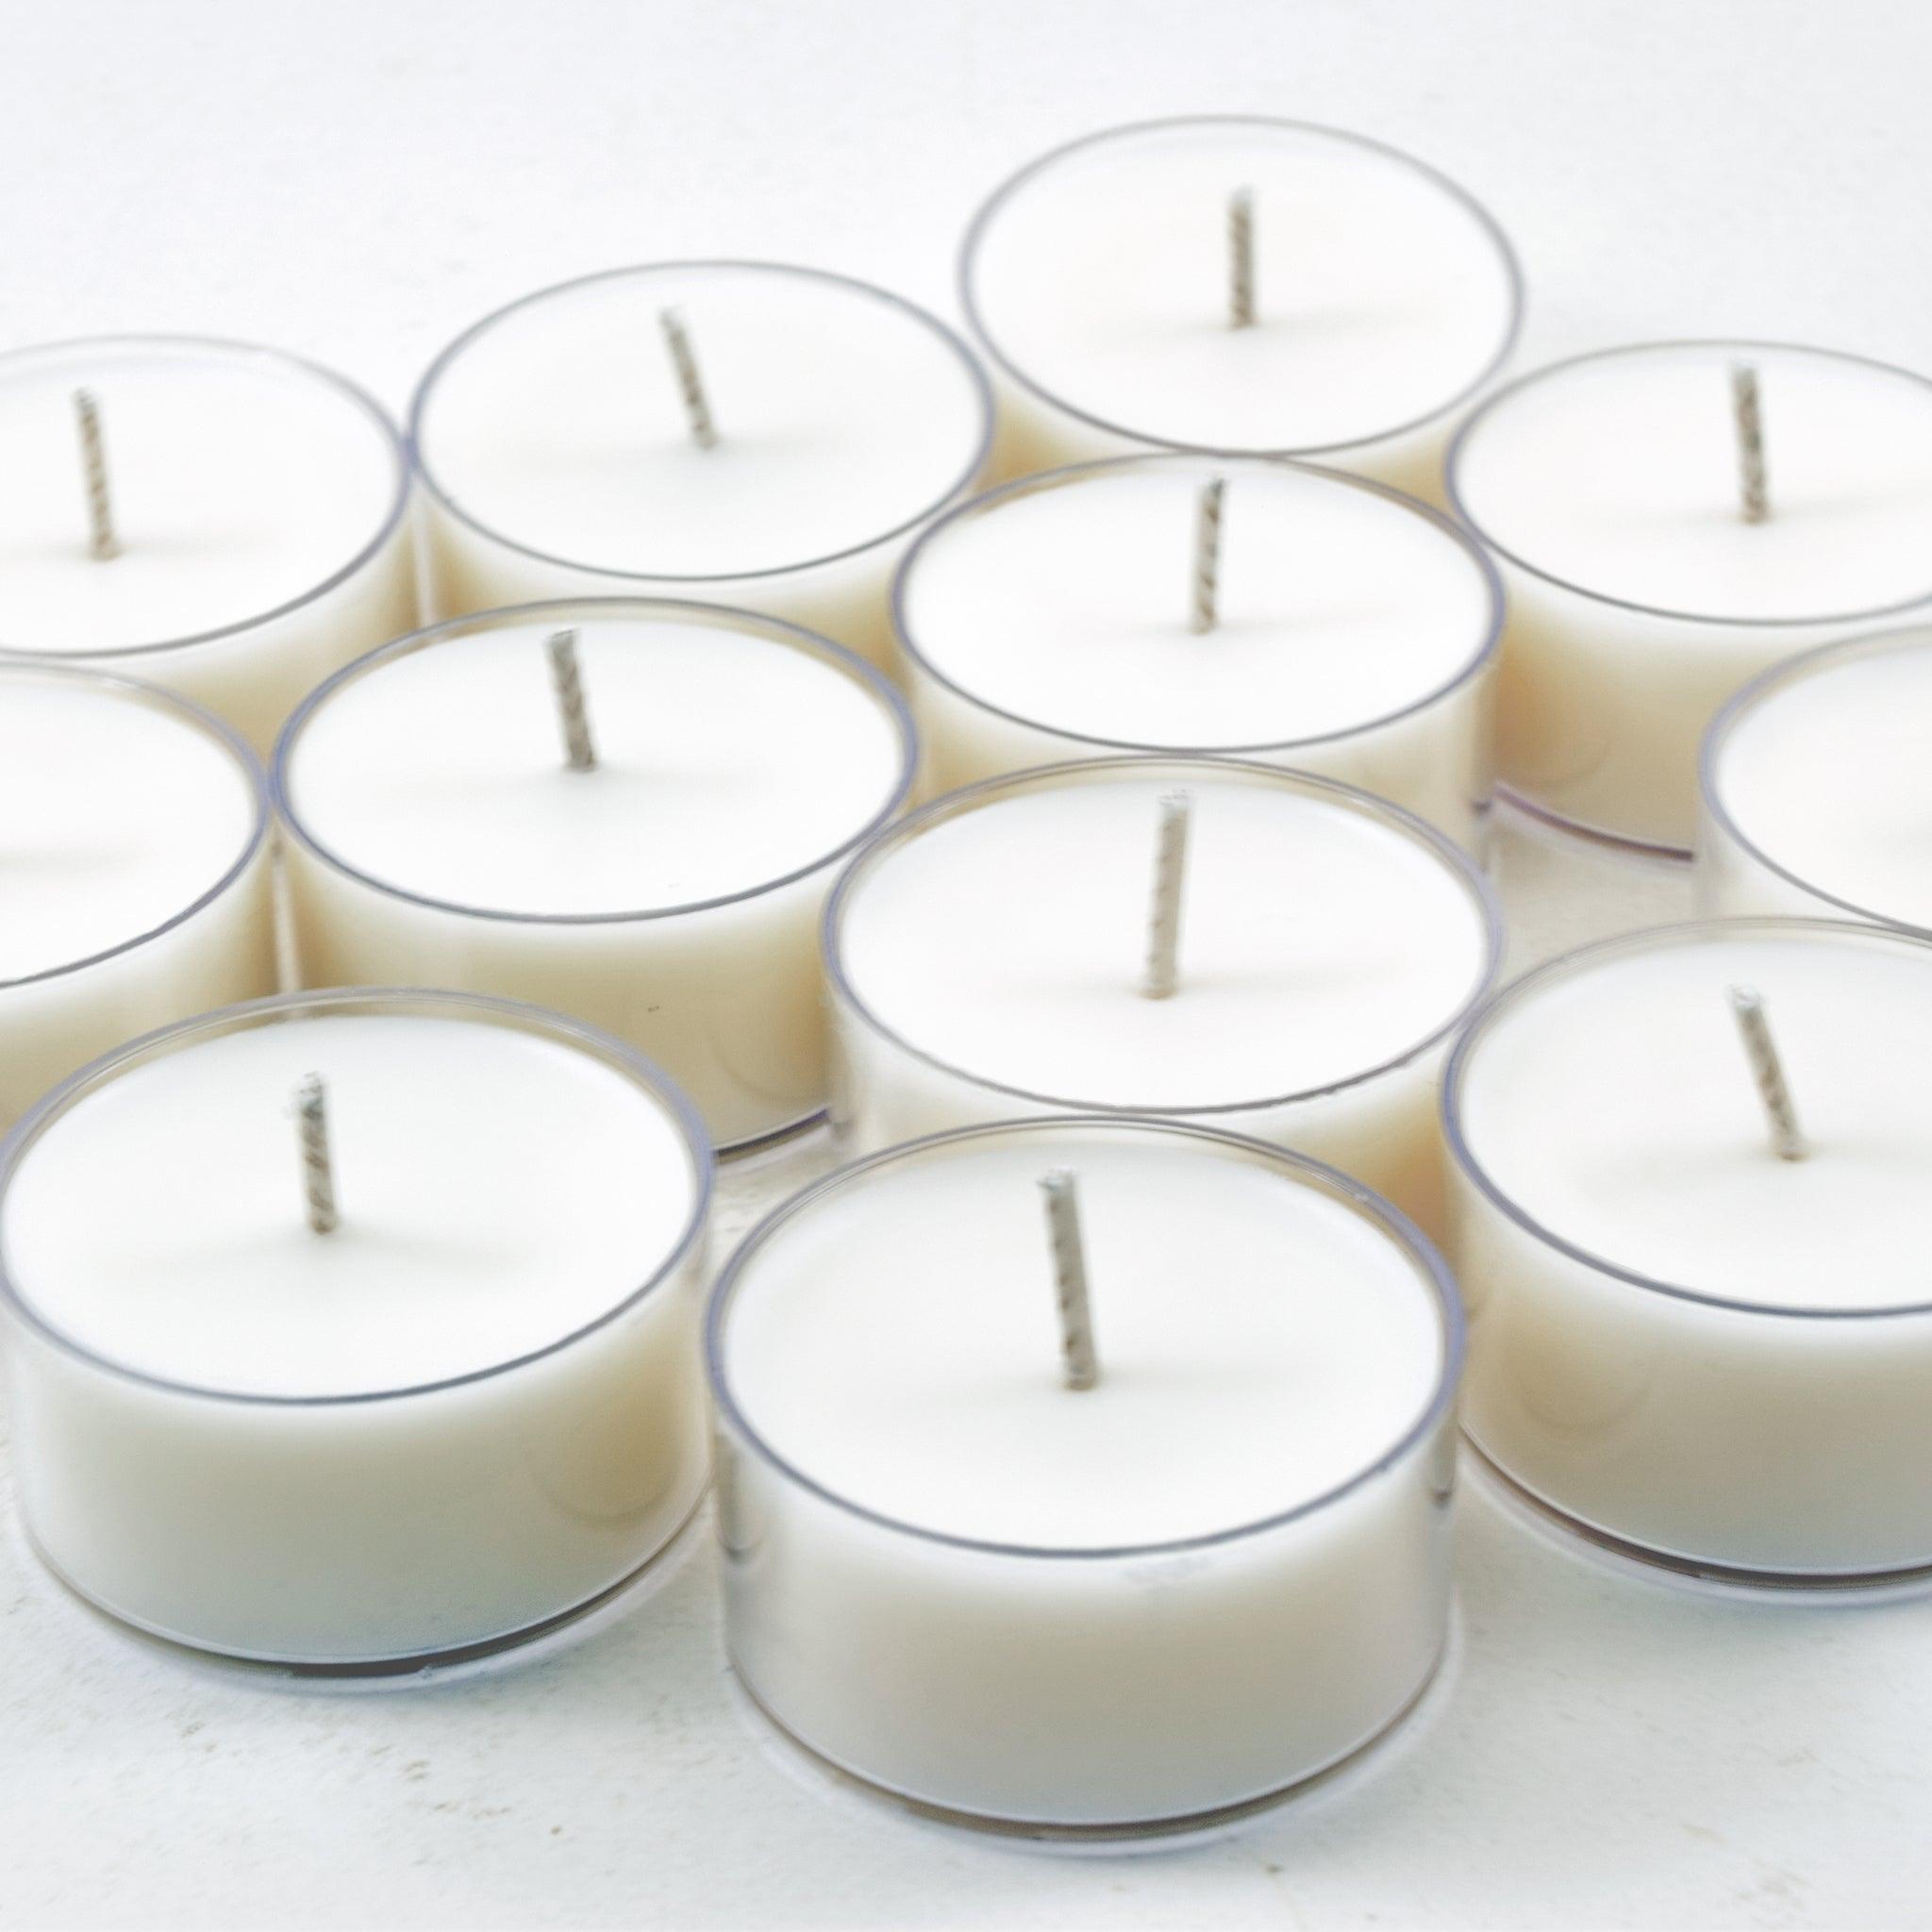 Buzz Off, Soy Tea Light 12-Pack - Candeo Candle